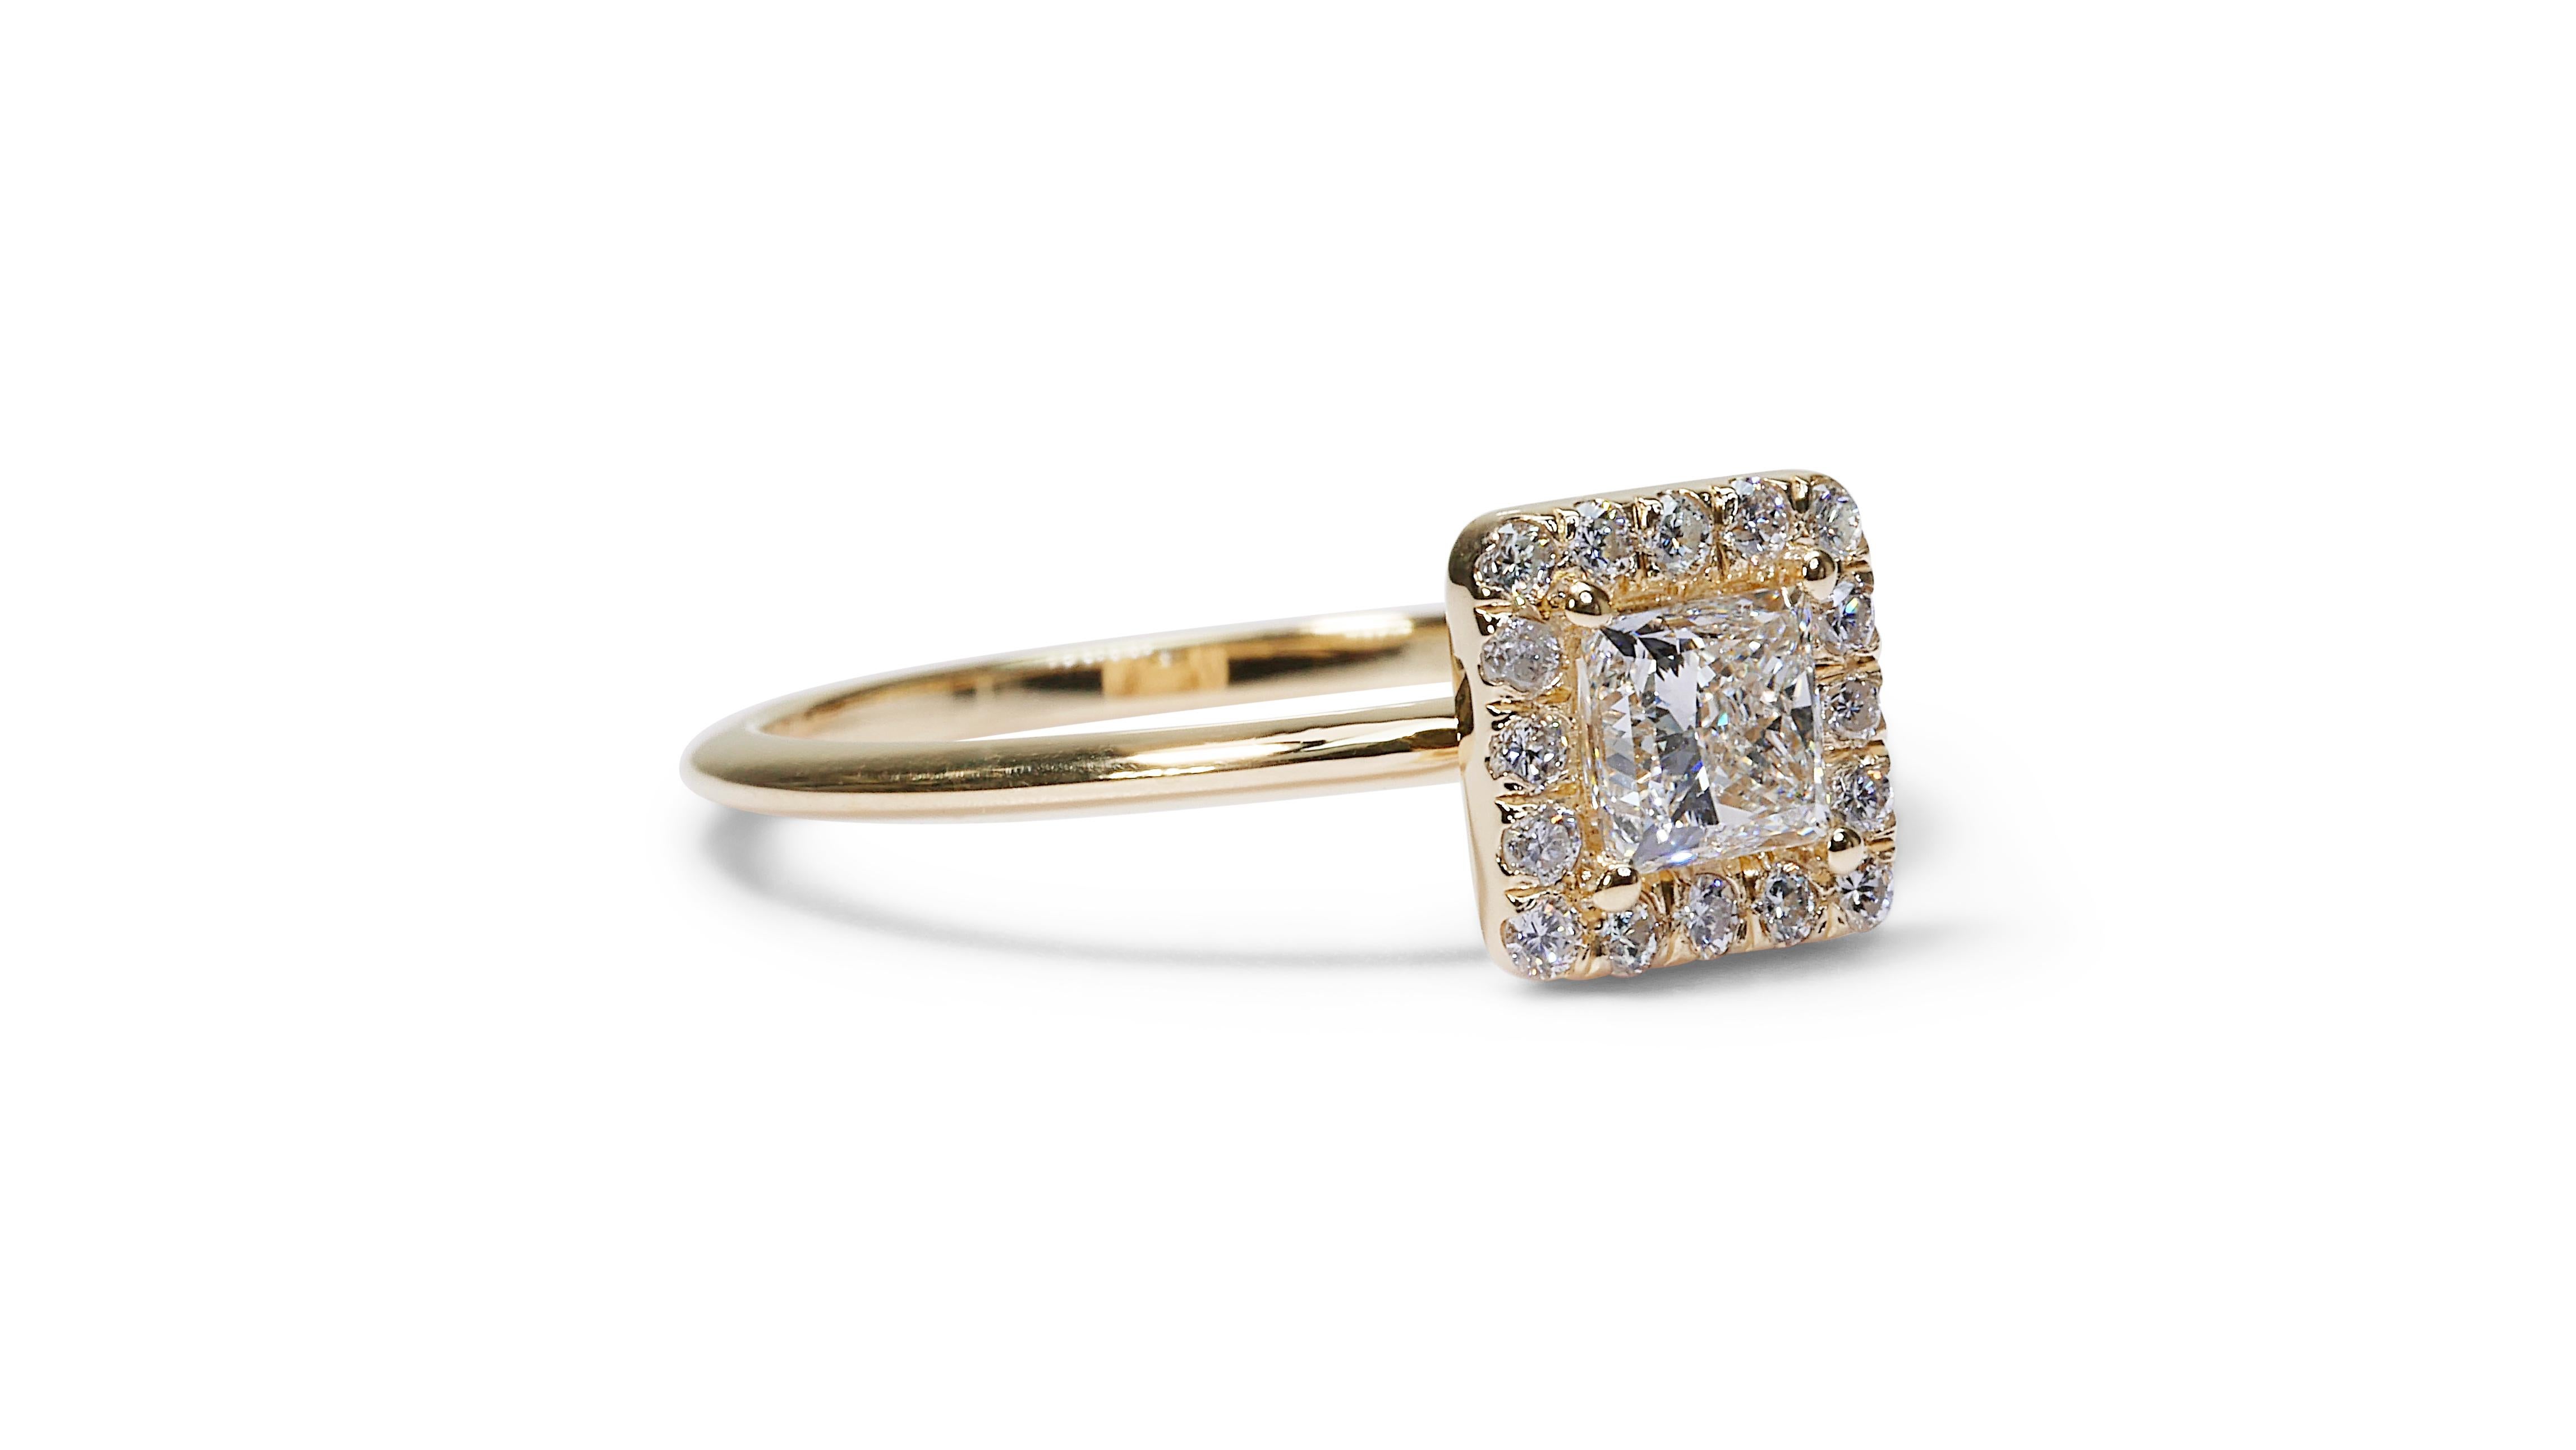 Charming 0.90ct Square-Cut Diamond Halo Ring in 18k Yellow Gold - GIA Certified For Sale 1